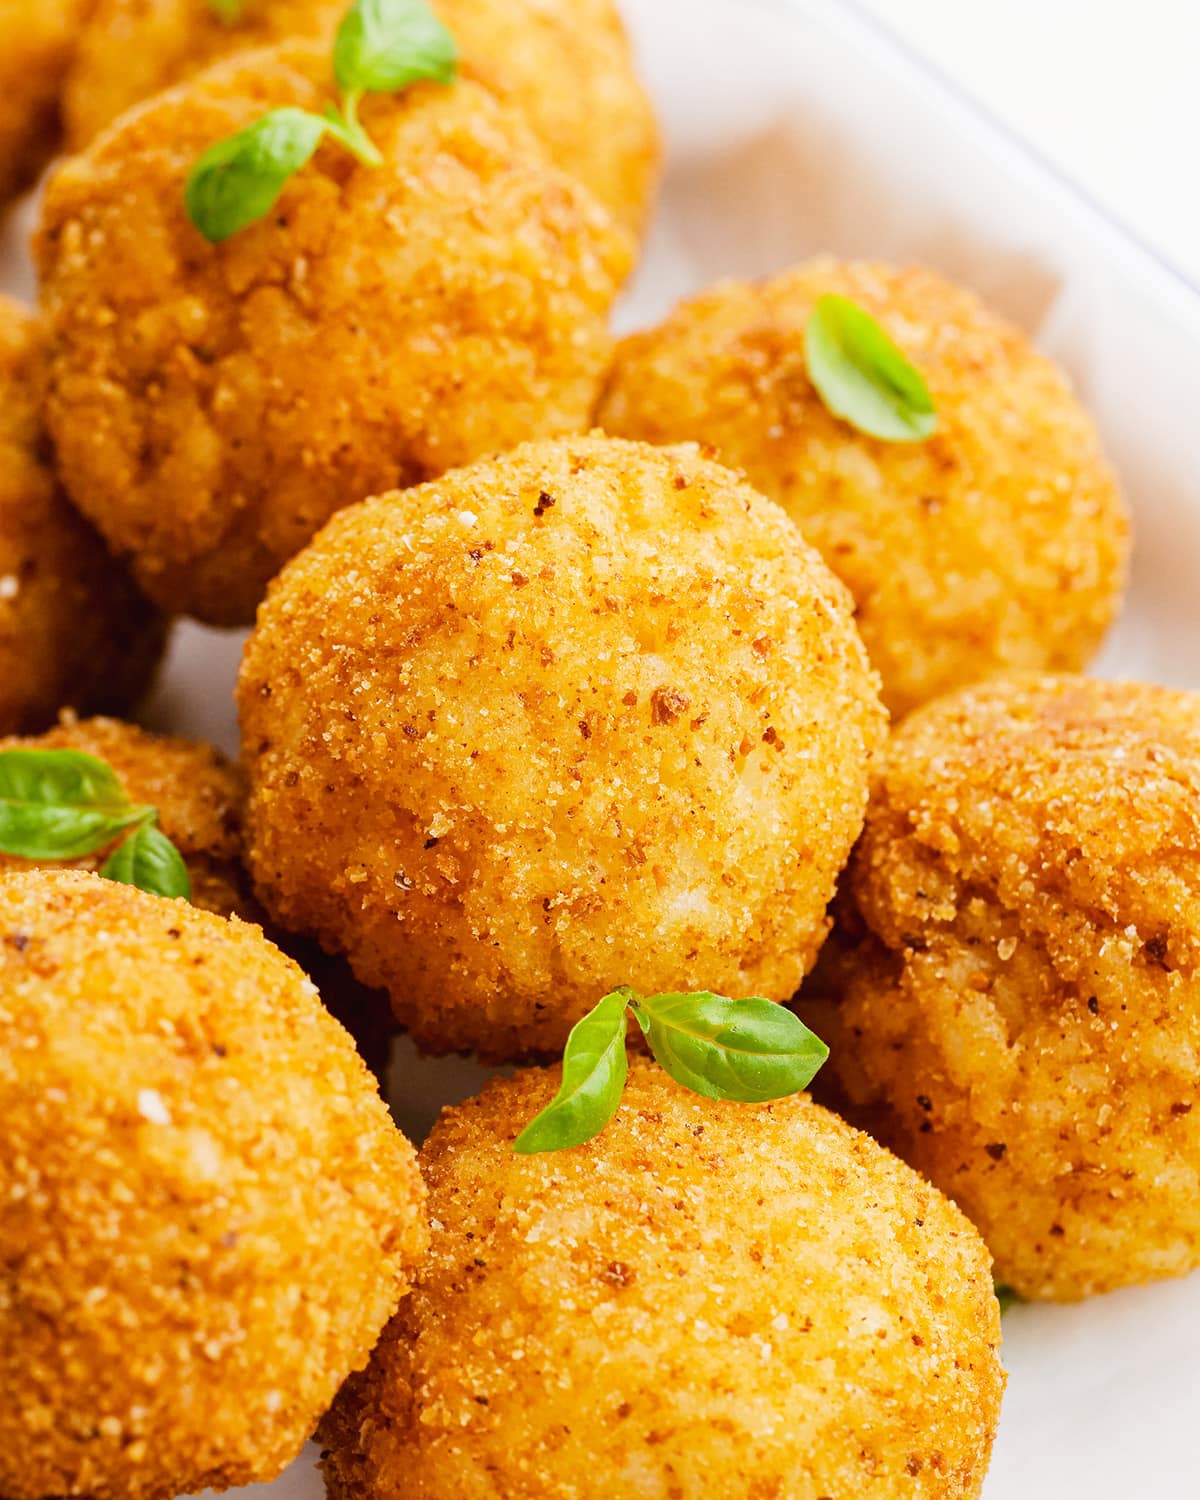 A close up of arancini balls in a pile, with small basil leaves among them.